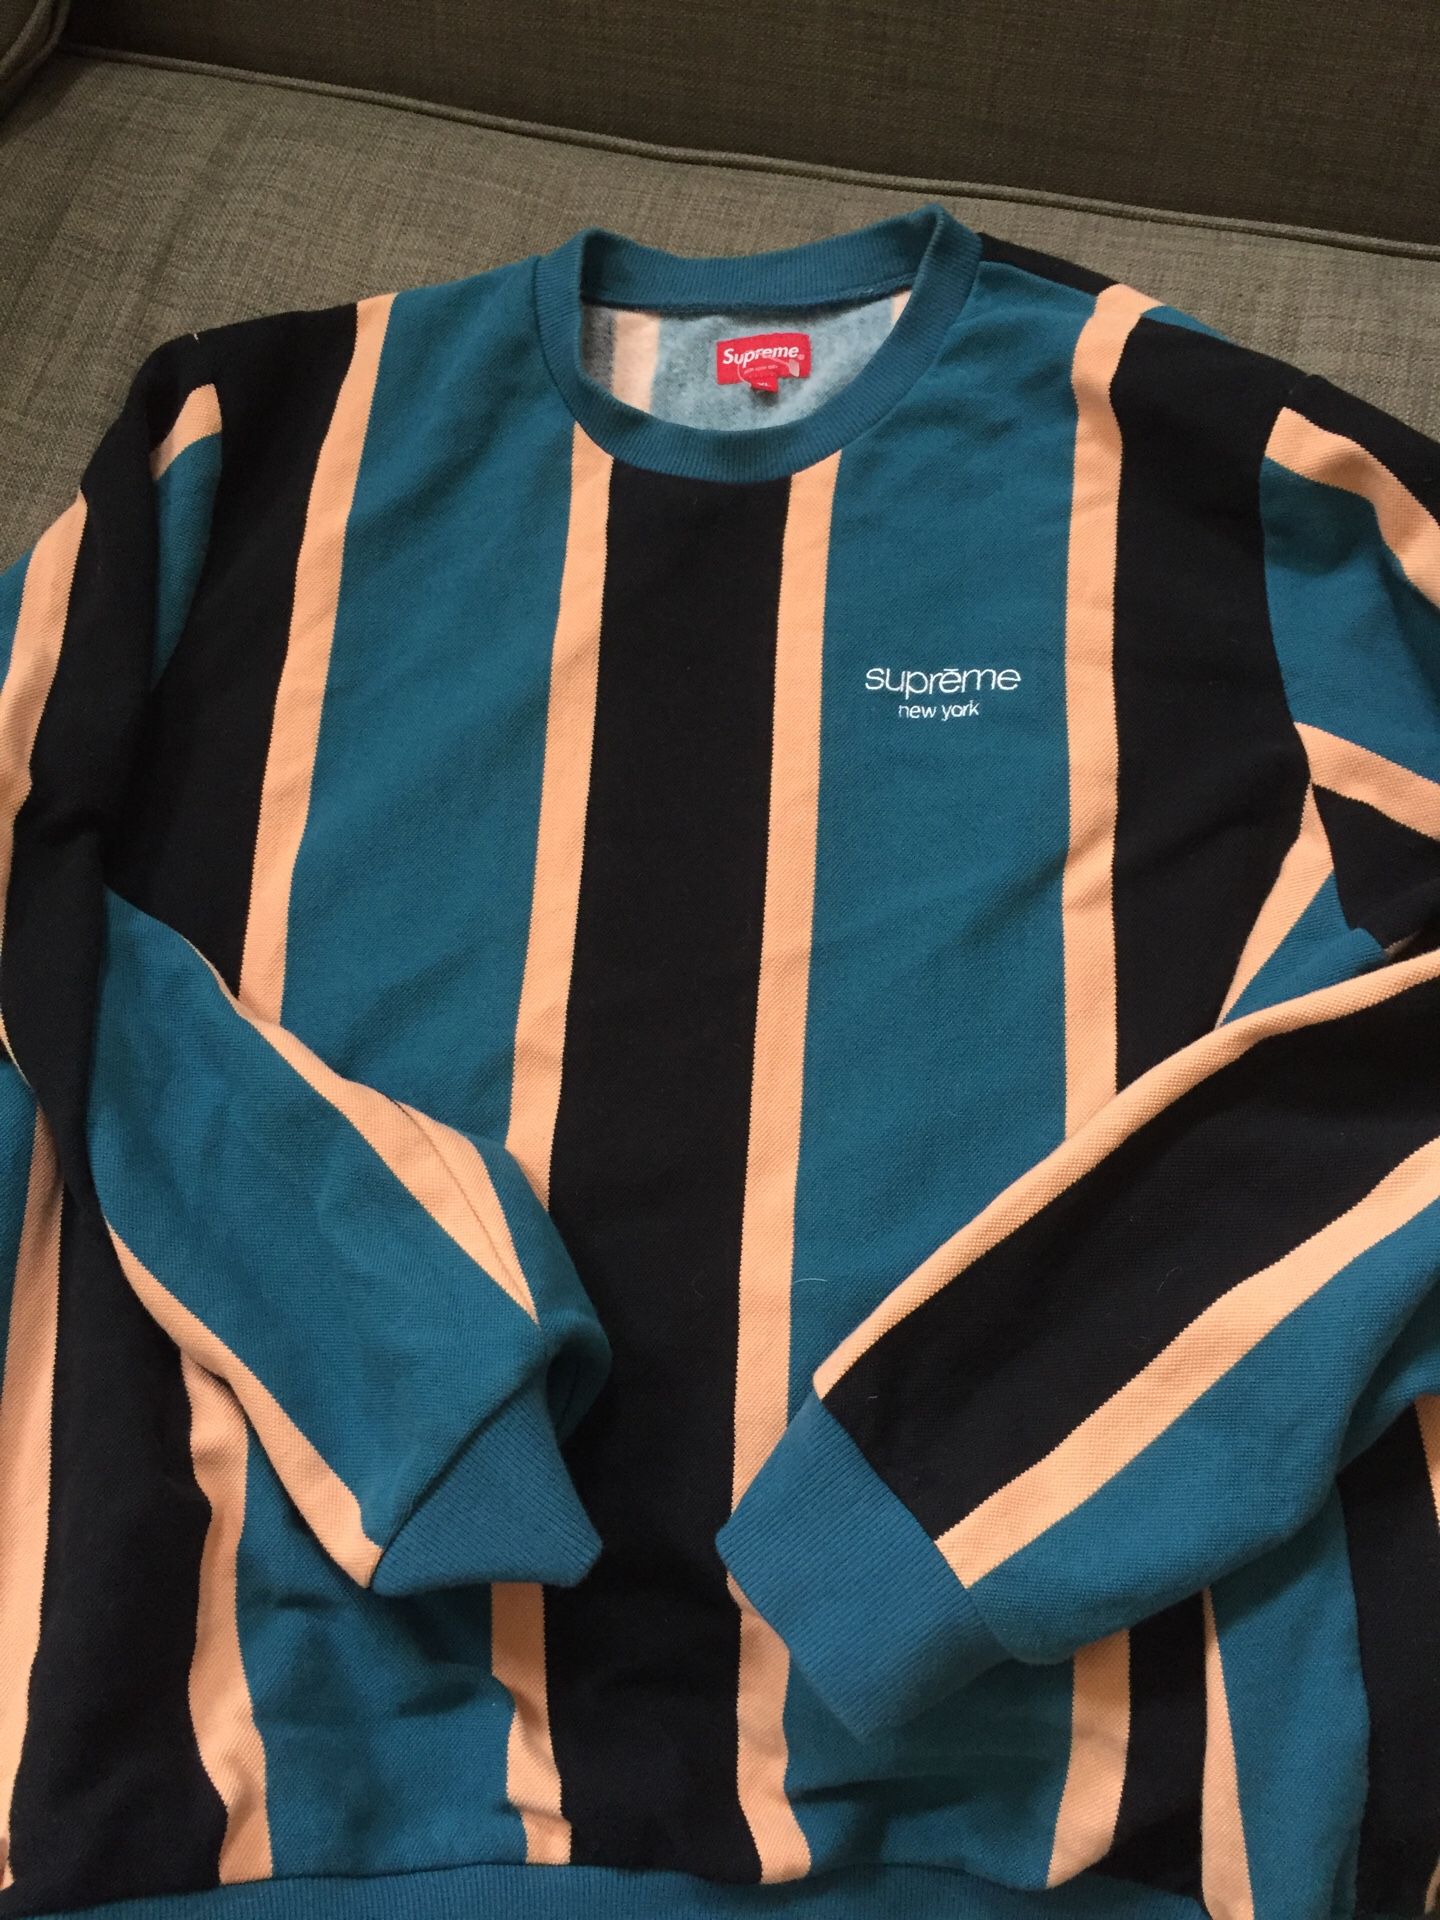 Supreme Sweatshirt size XL for Sale in Los Angeles, CA - OfferUp